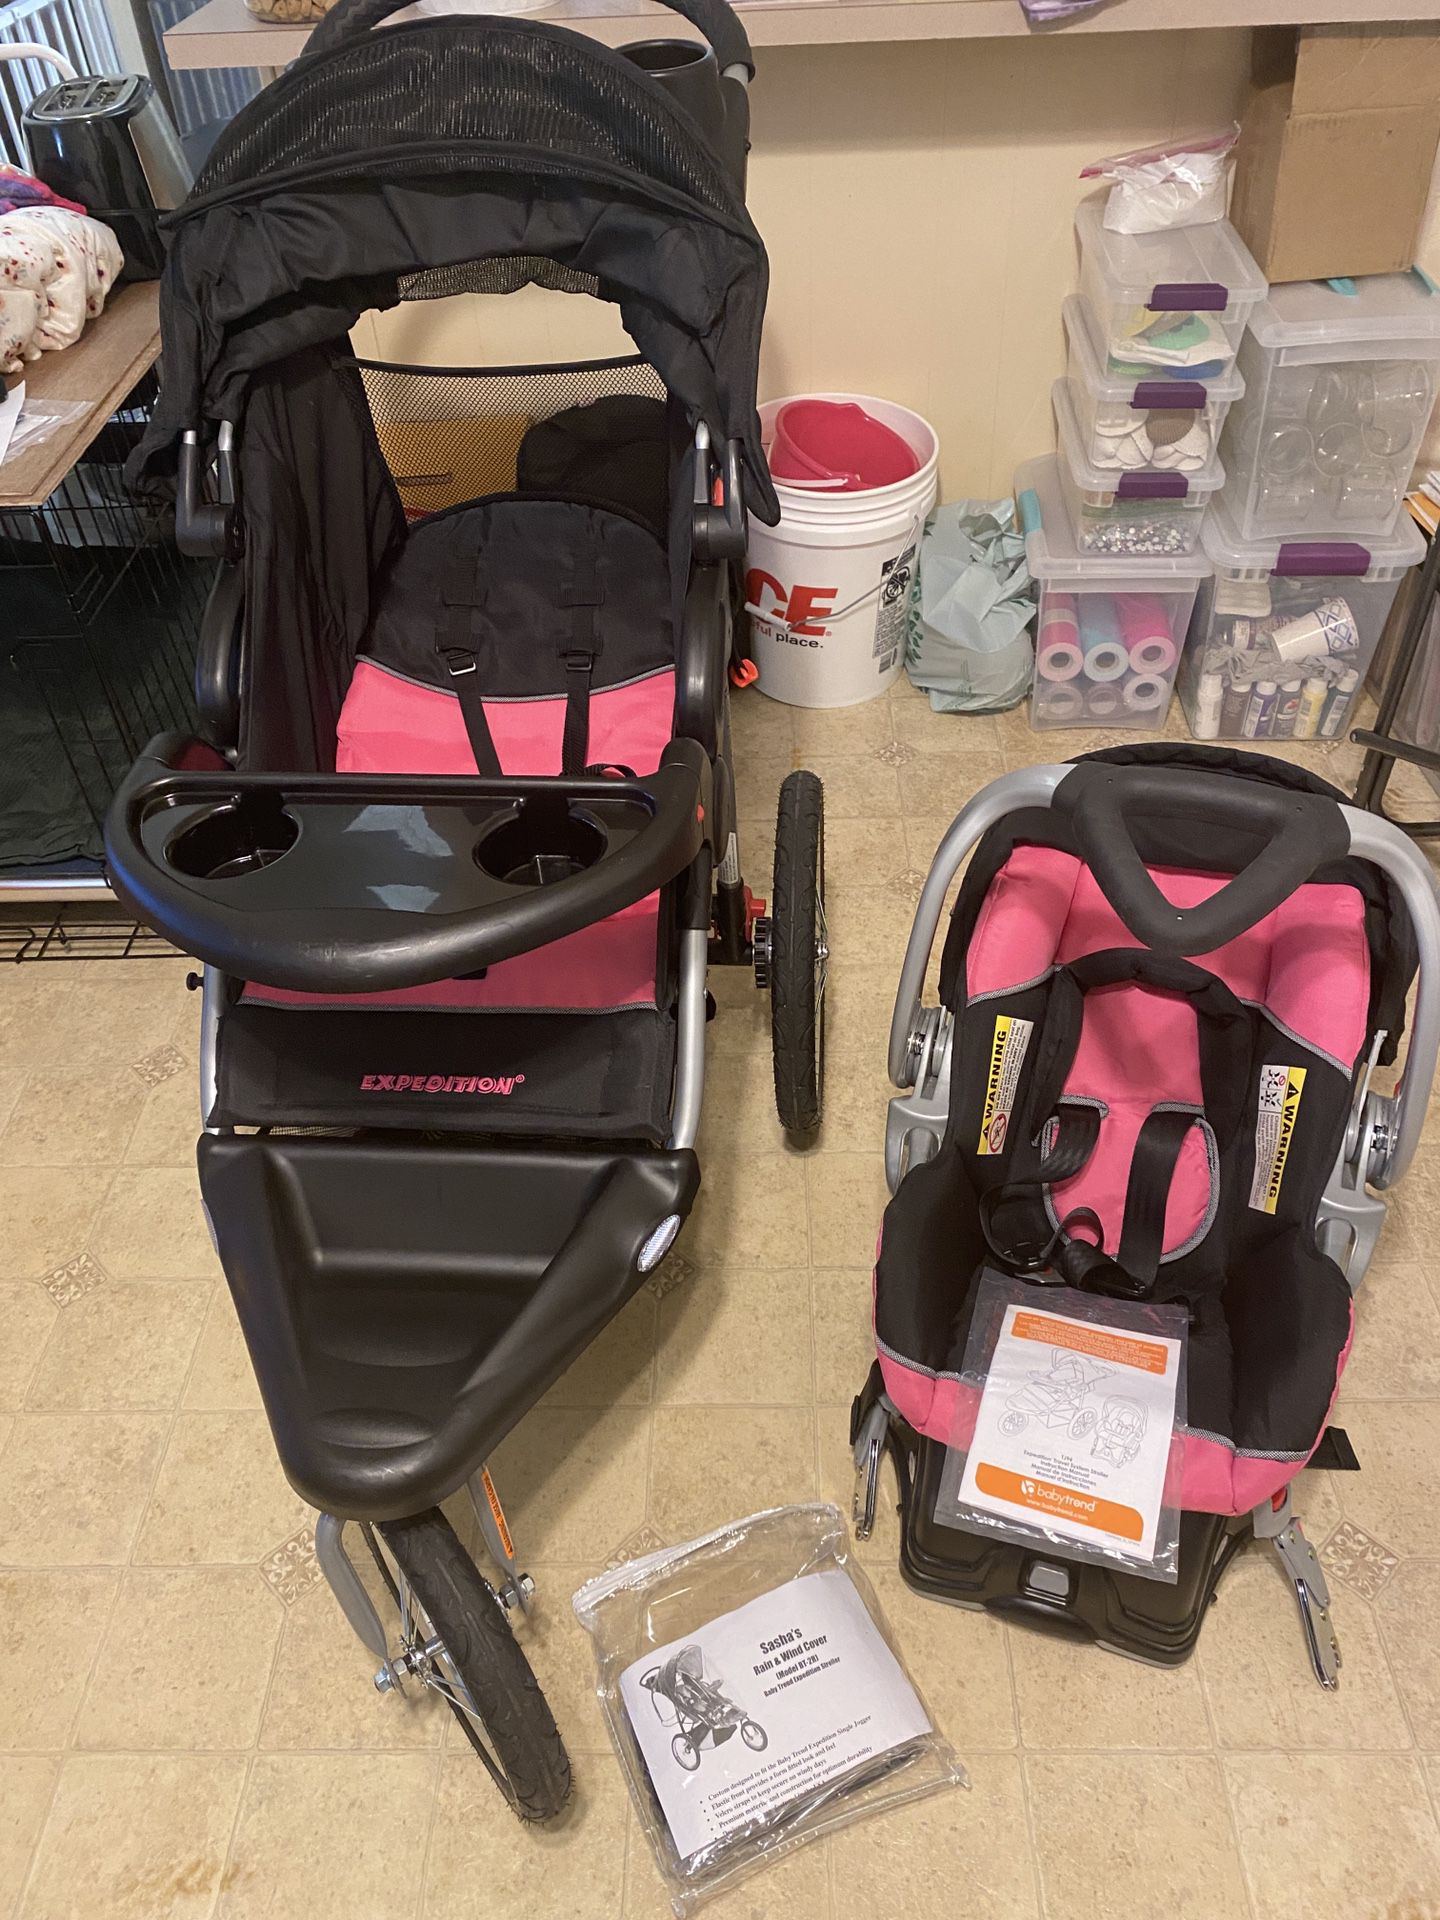 * Sale Pending* BabyTrend Expedition Travel System